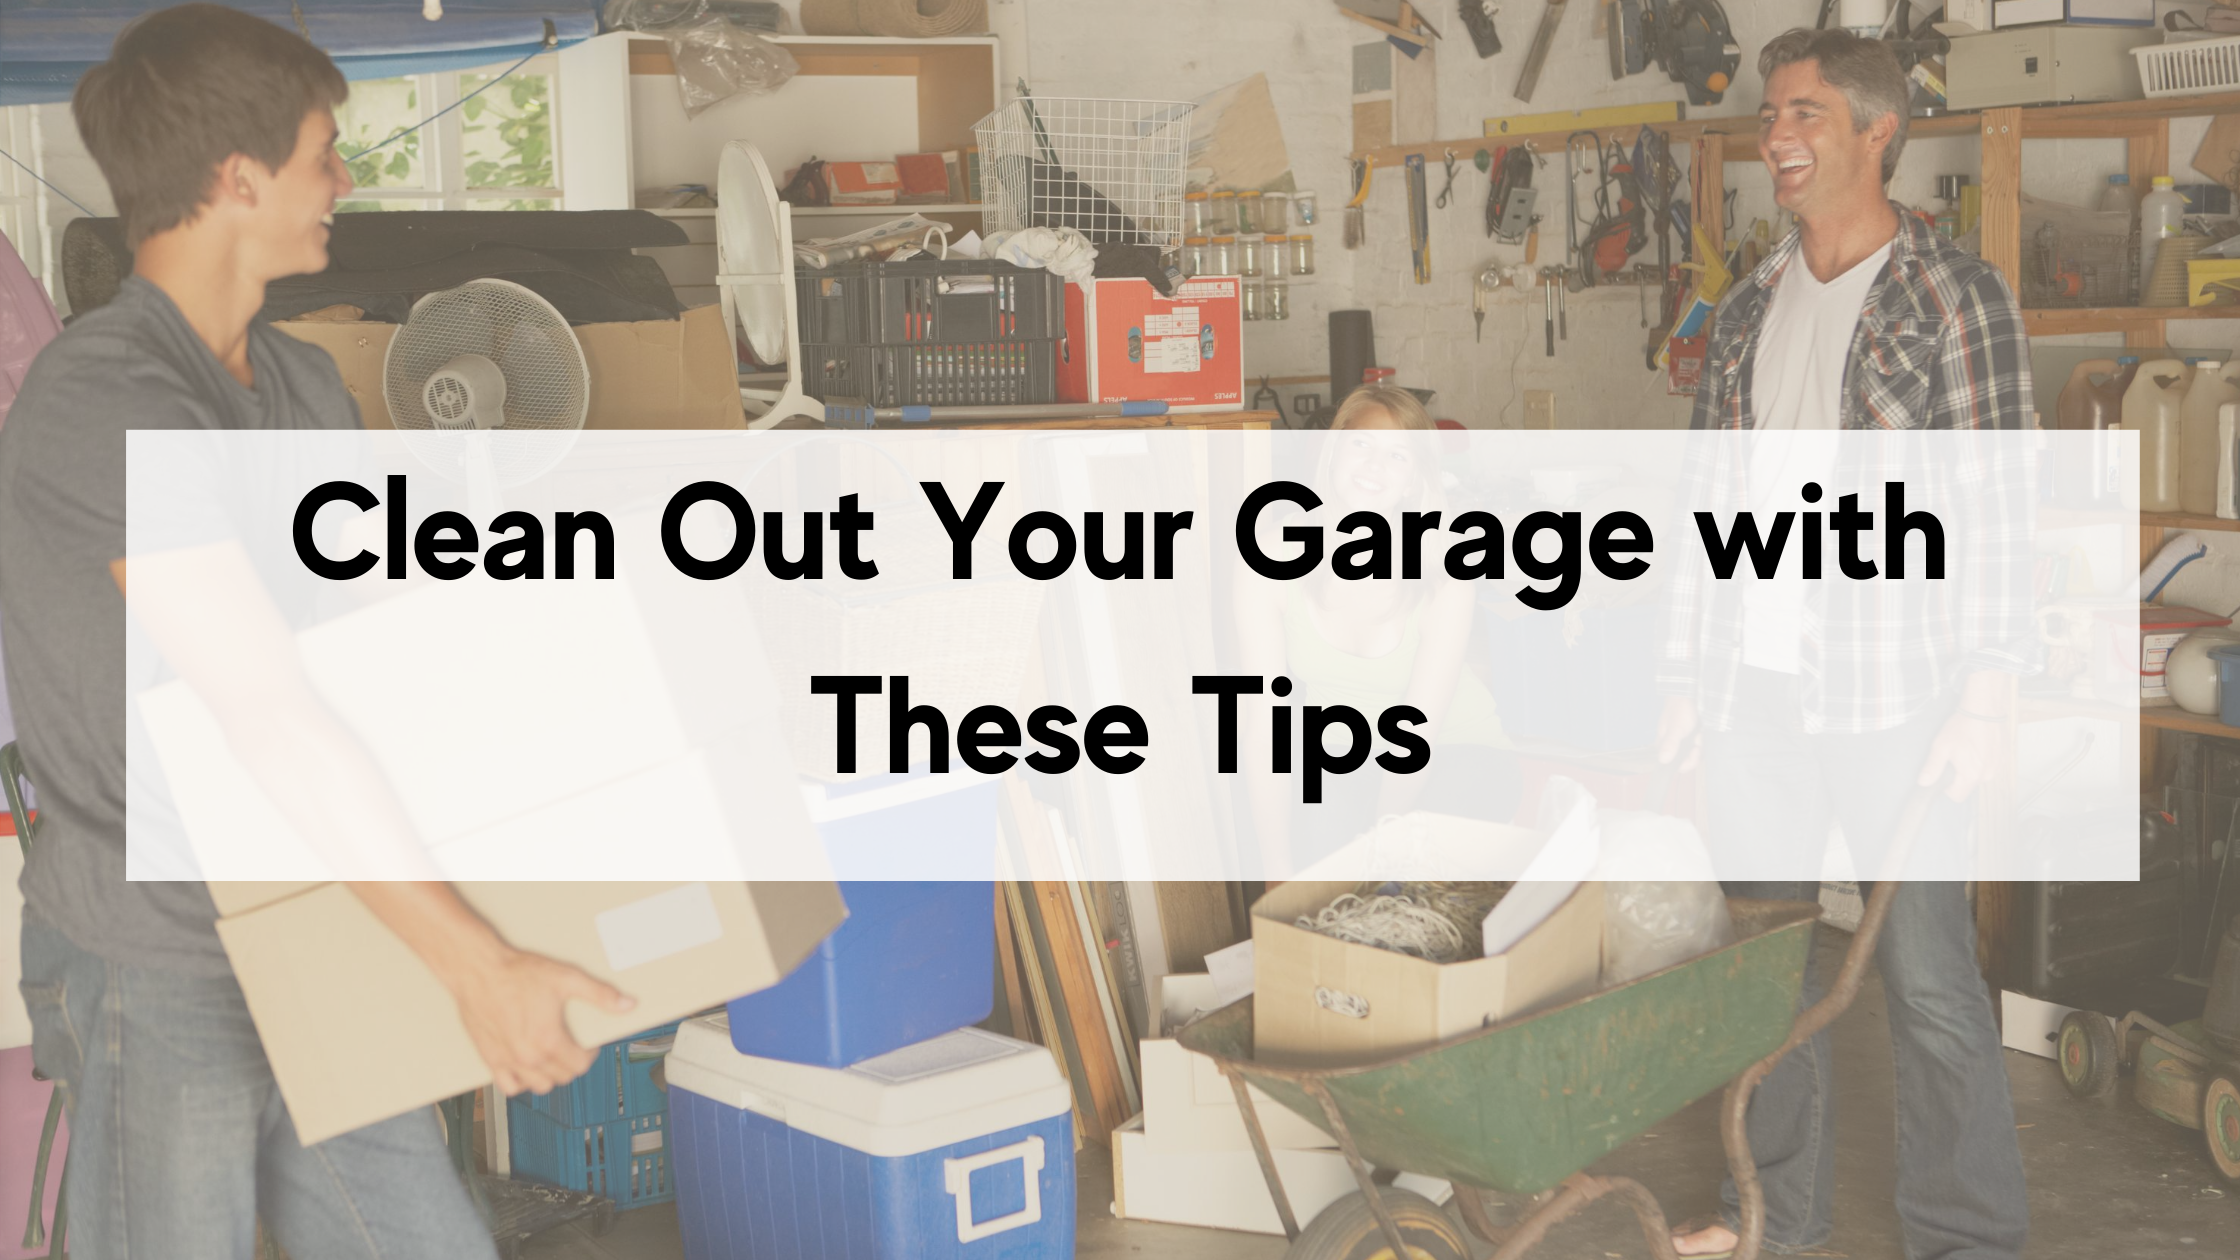 https://handymanconnection.com/wp-content/uploads/2021/05/Clean-Out-Your-Garage-with-These-Tips.png